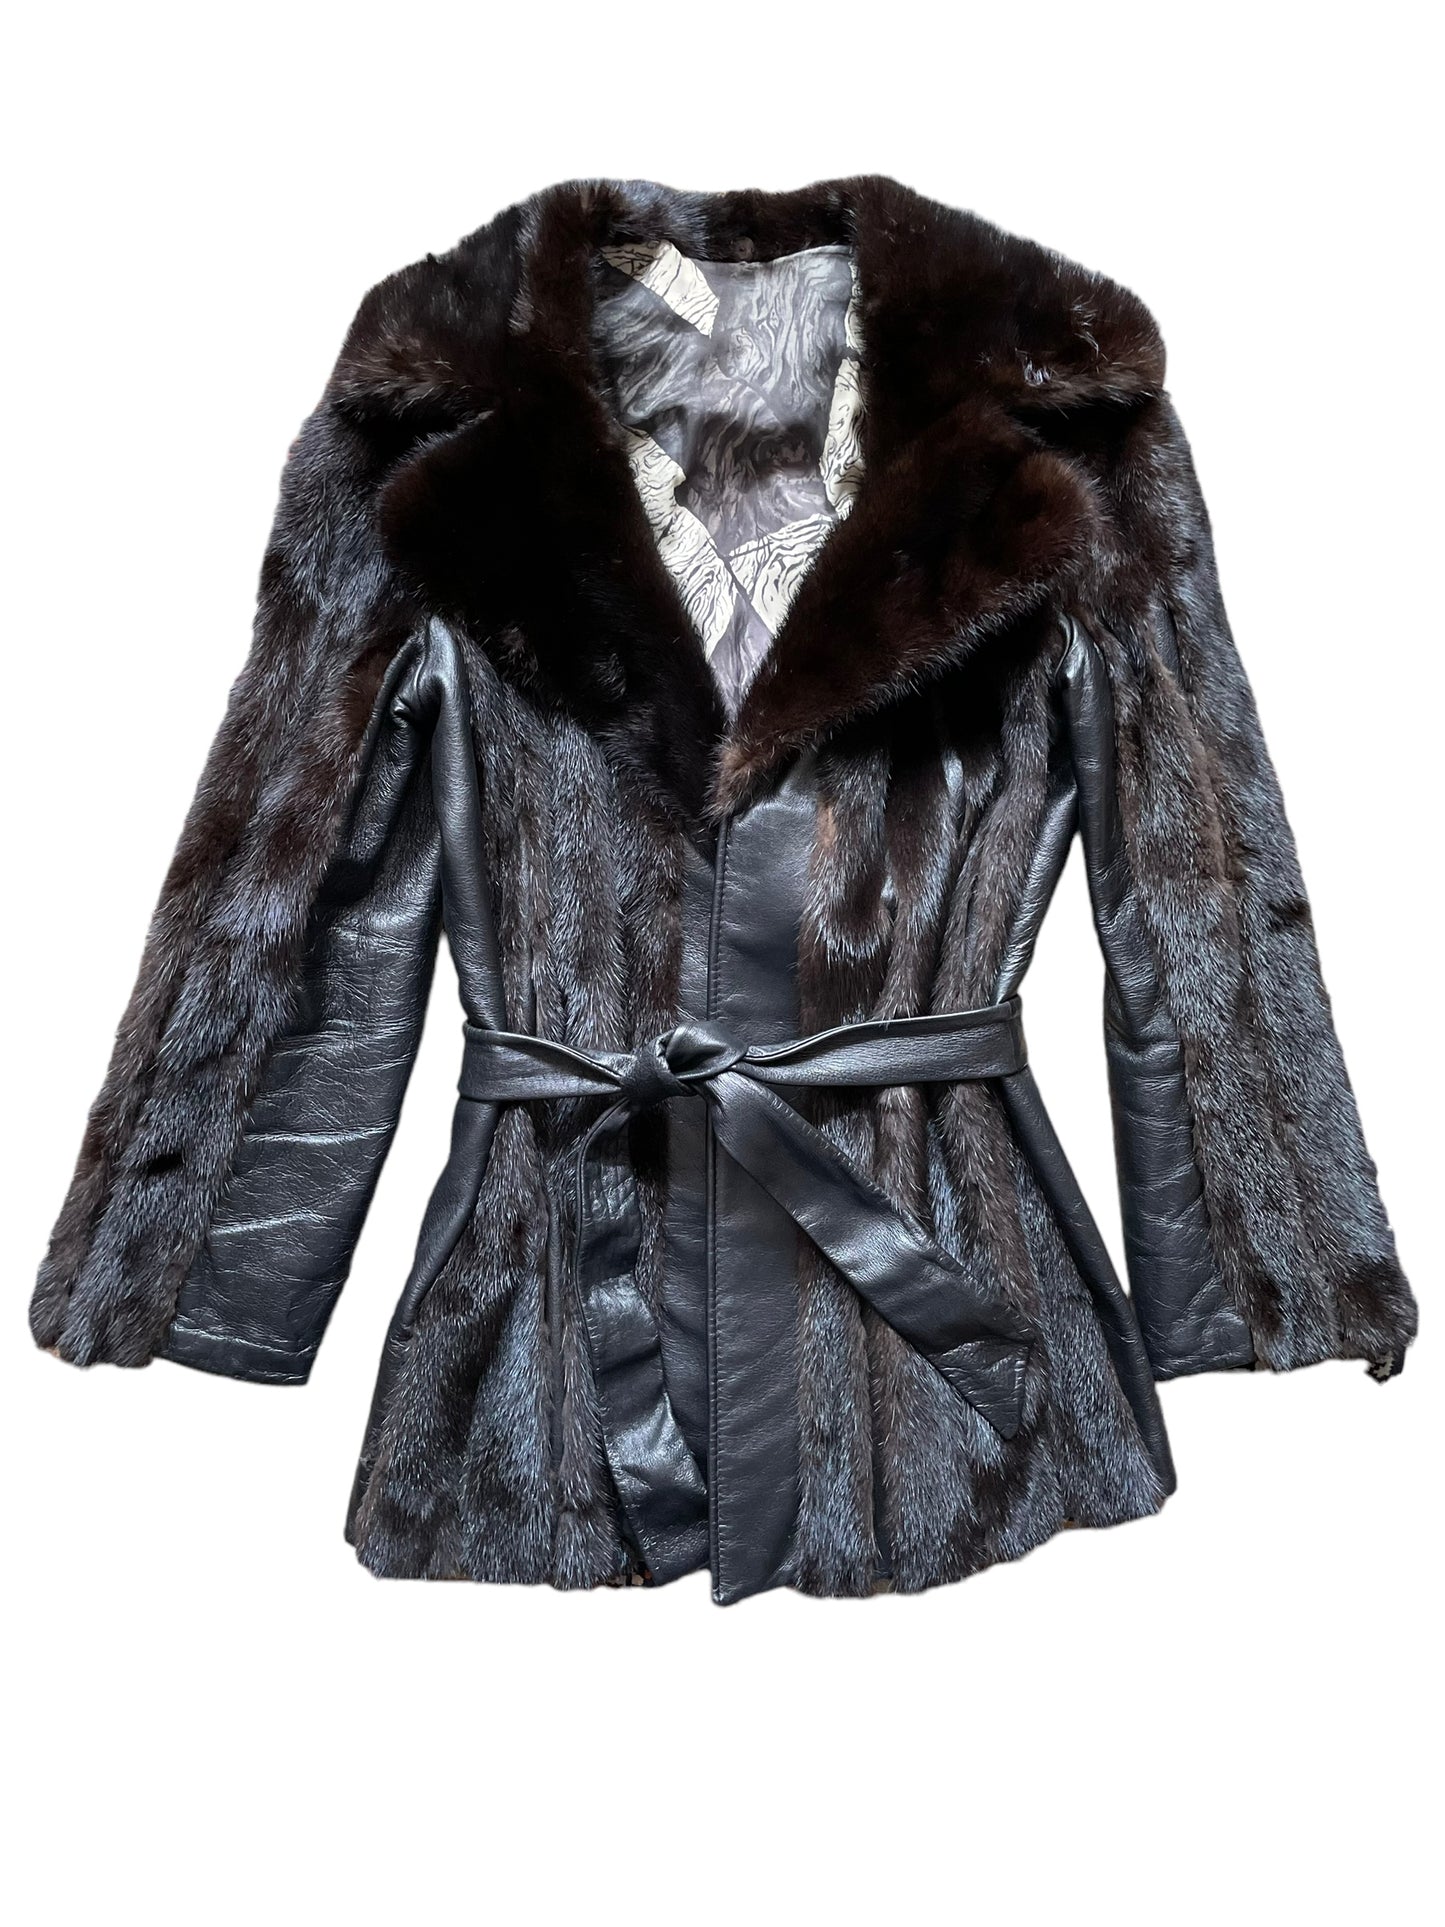 Full front view of Vintage 1940s-50s Leather and Fur Belted Coat SZ M-L | Seattle True Vintage | Barn Owl Vintage Coats